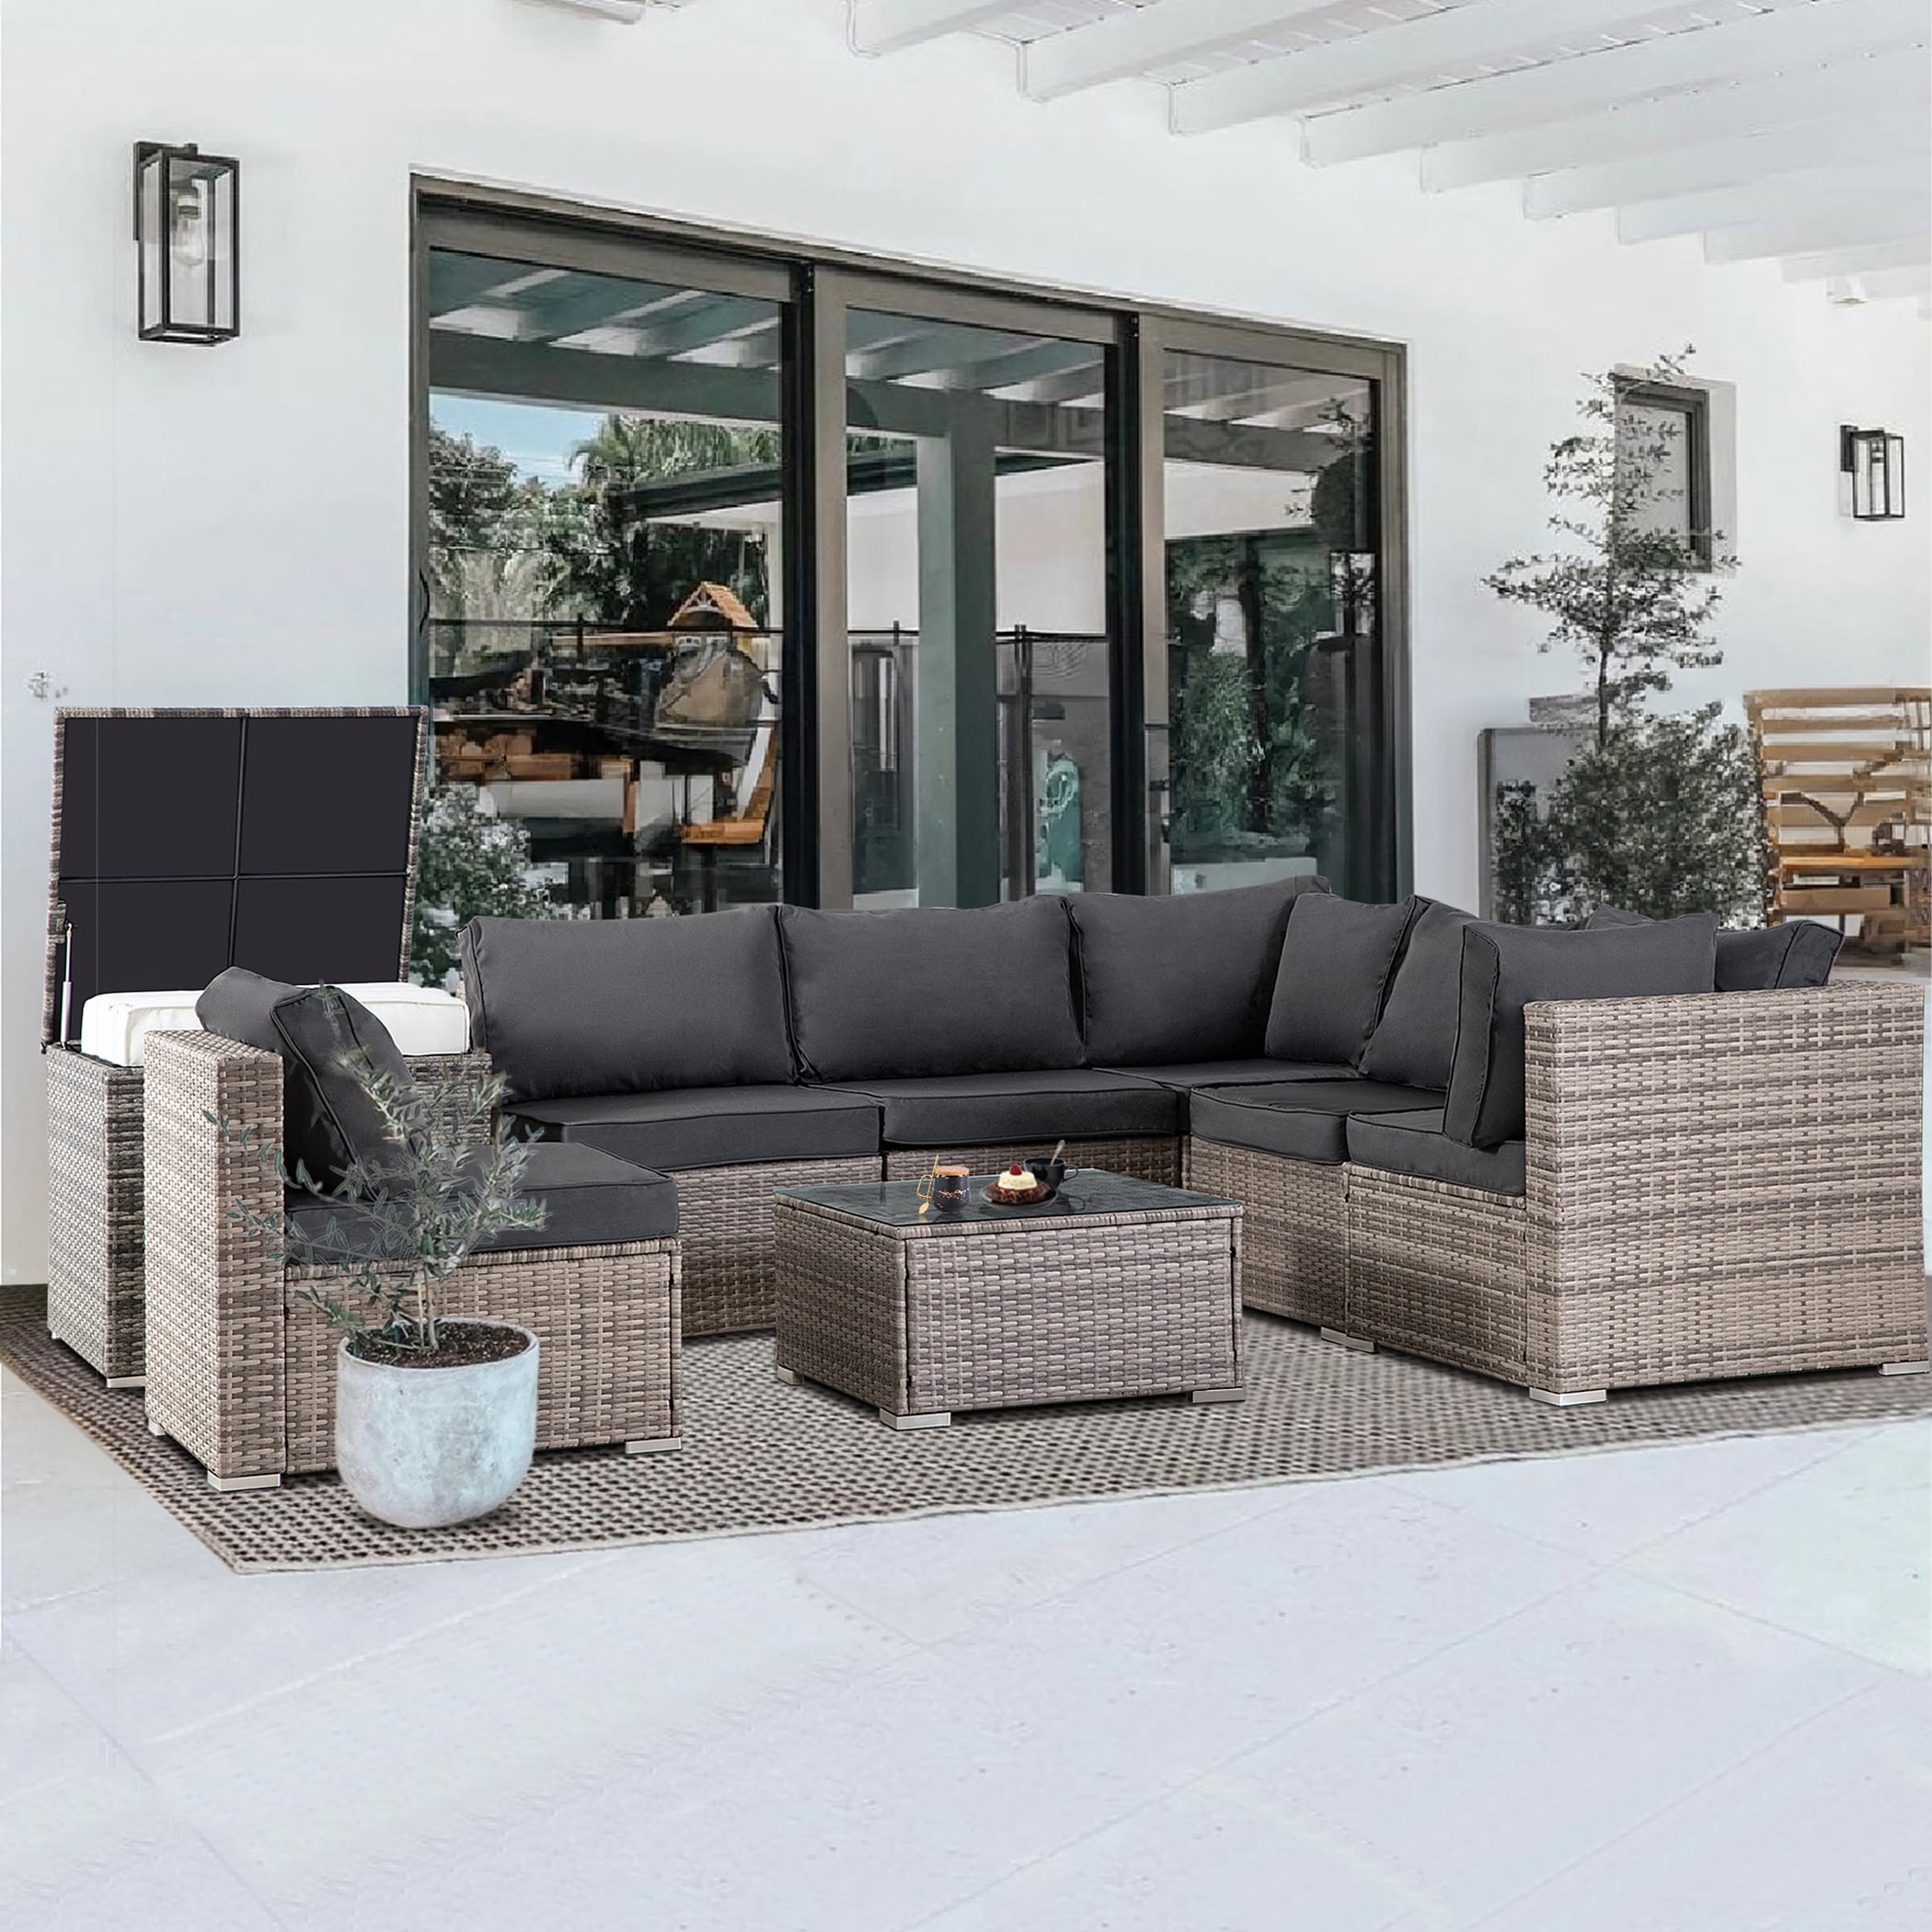 FOREST HOME 7-Piece Rattan Patio Conversation Set with Gray Cushions at